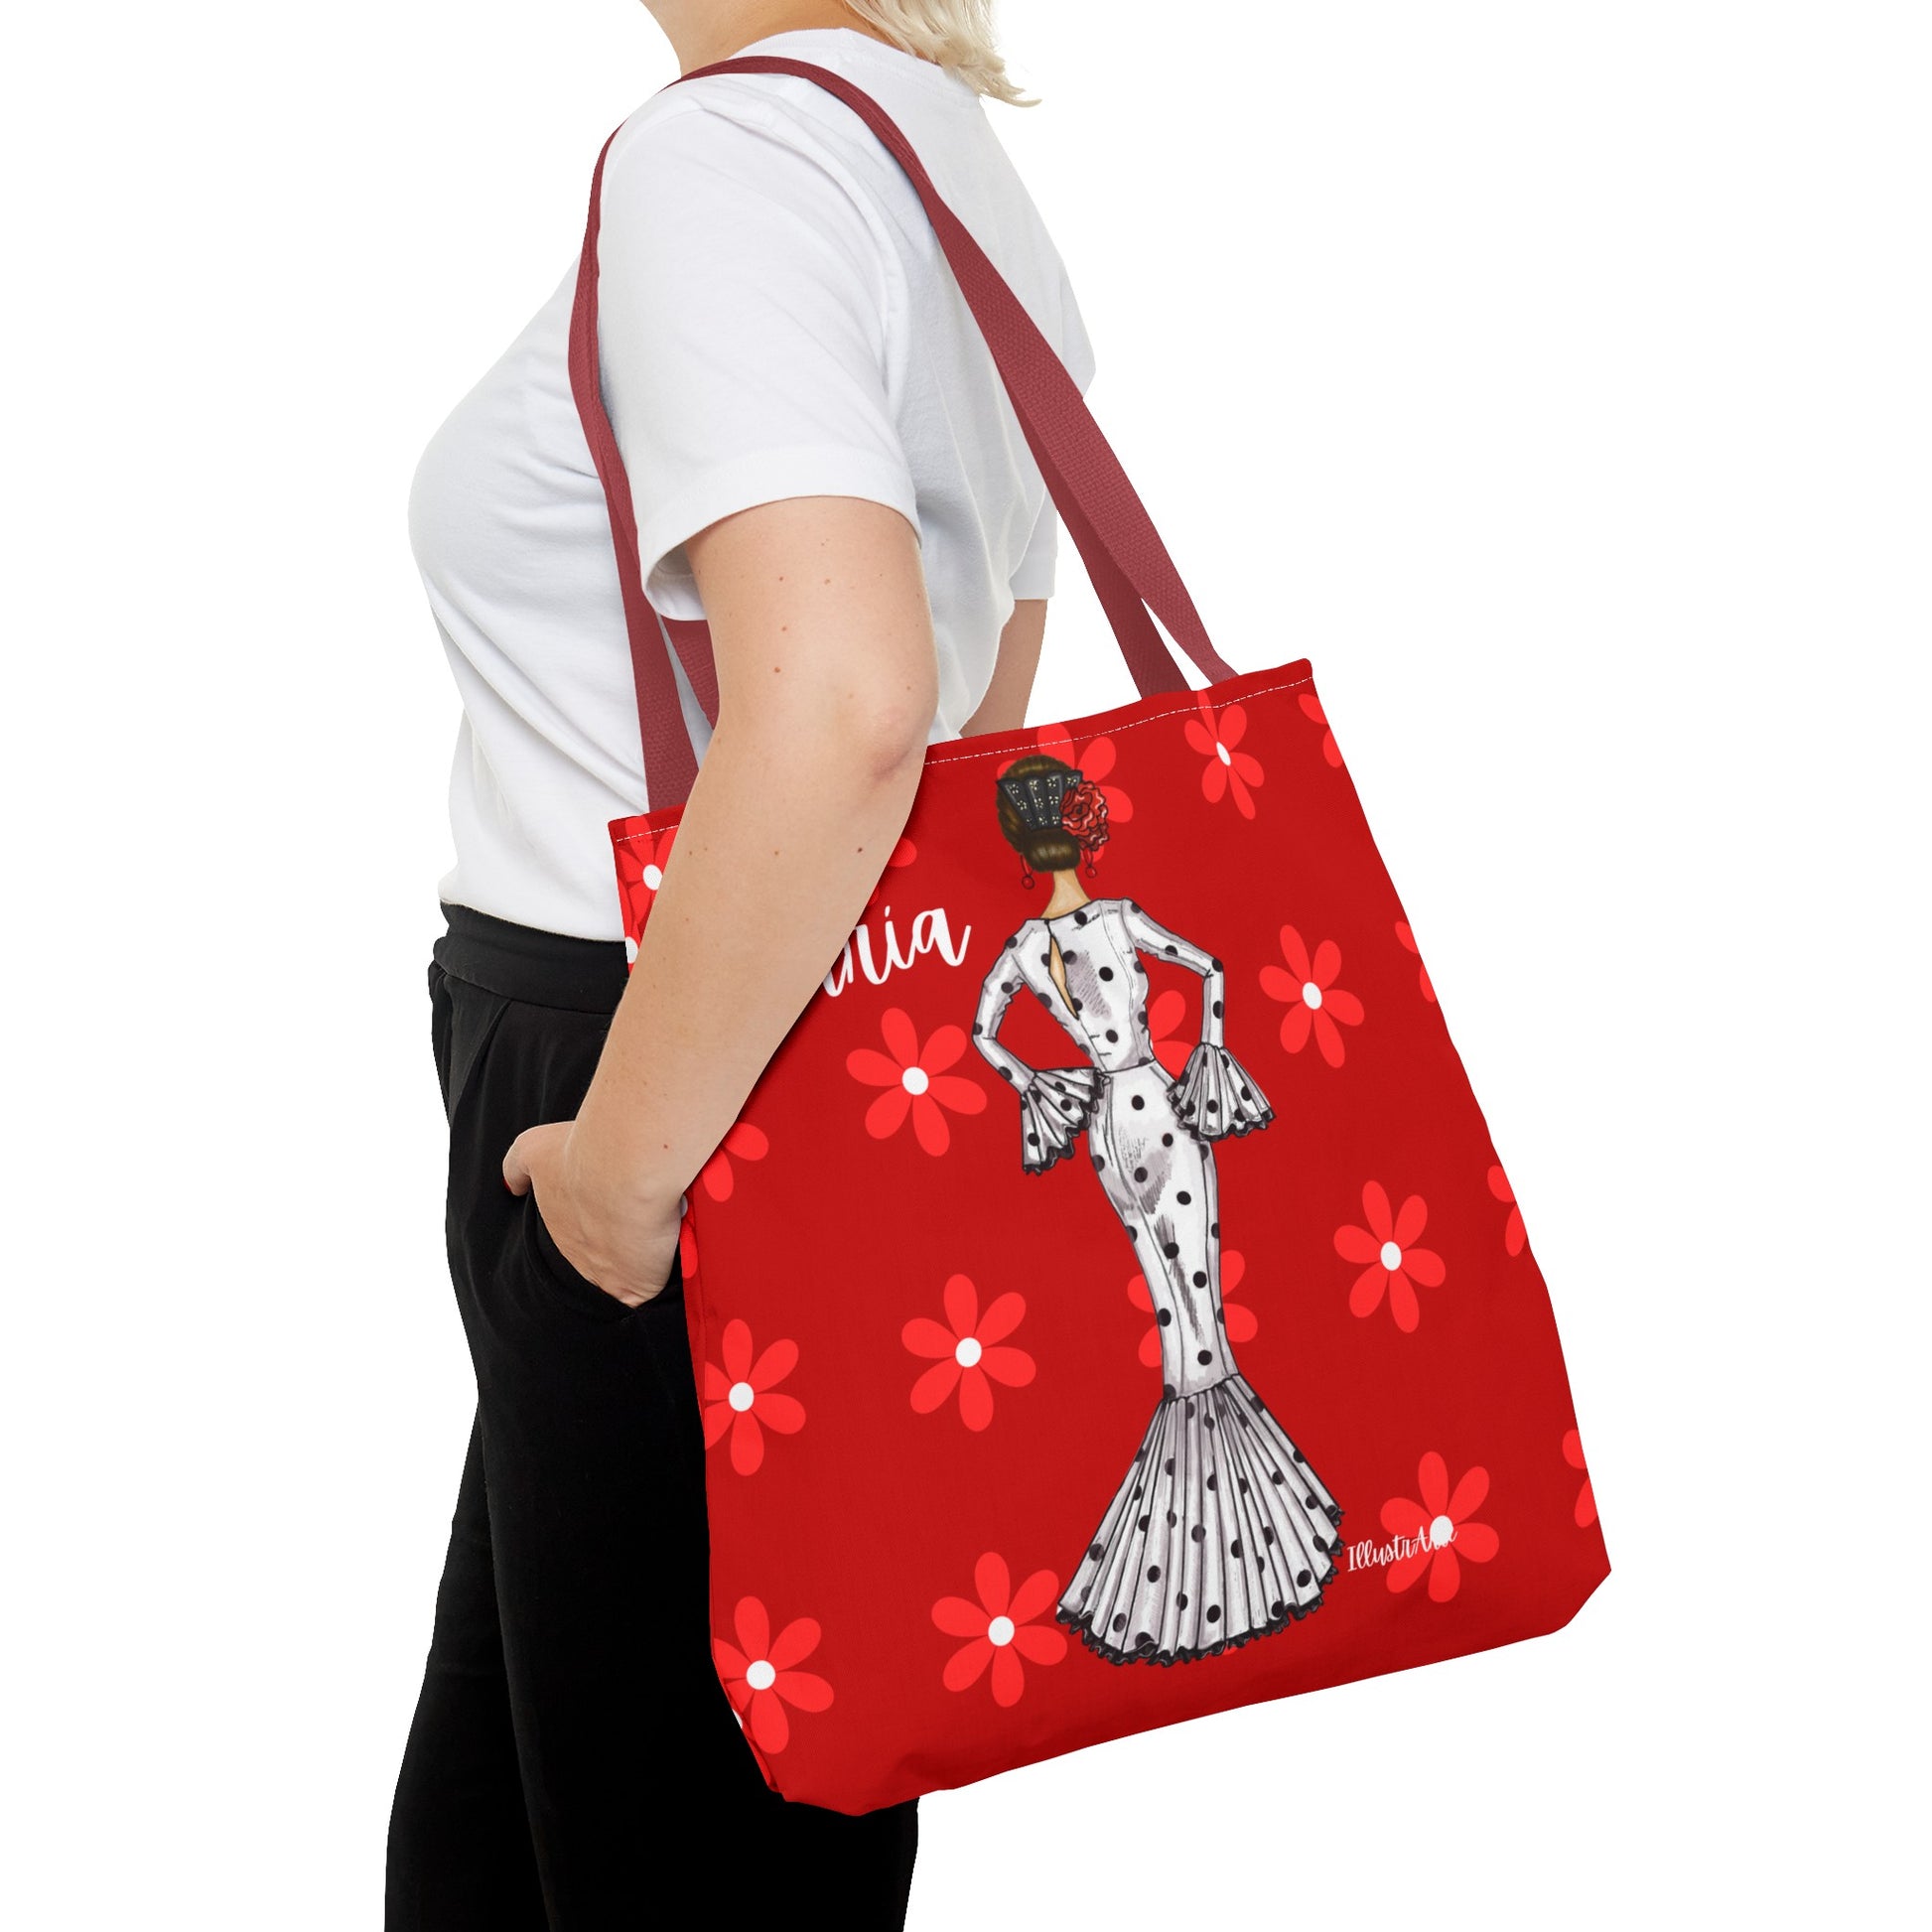 a woman carrying a red bag with a picture of a woman on it